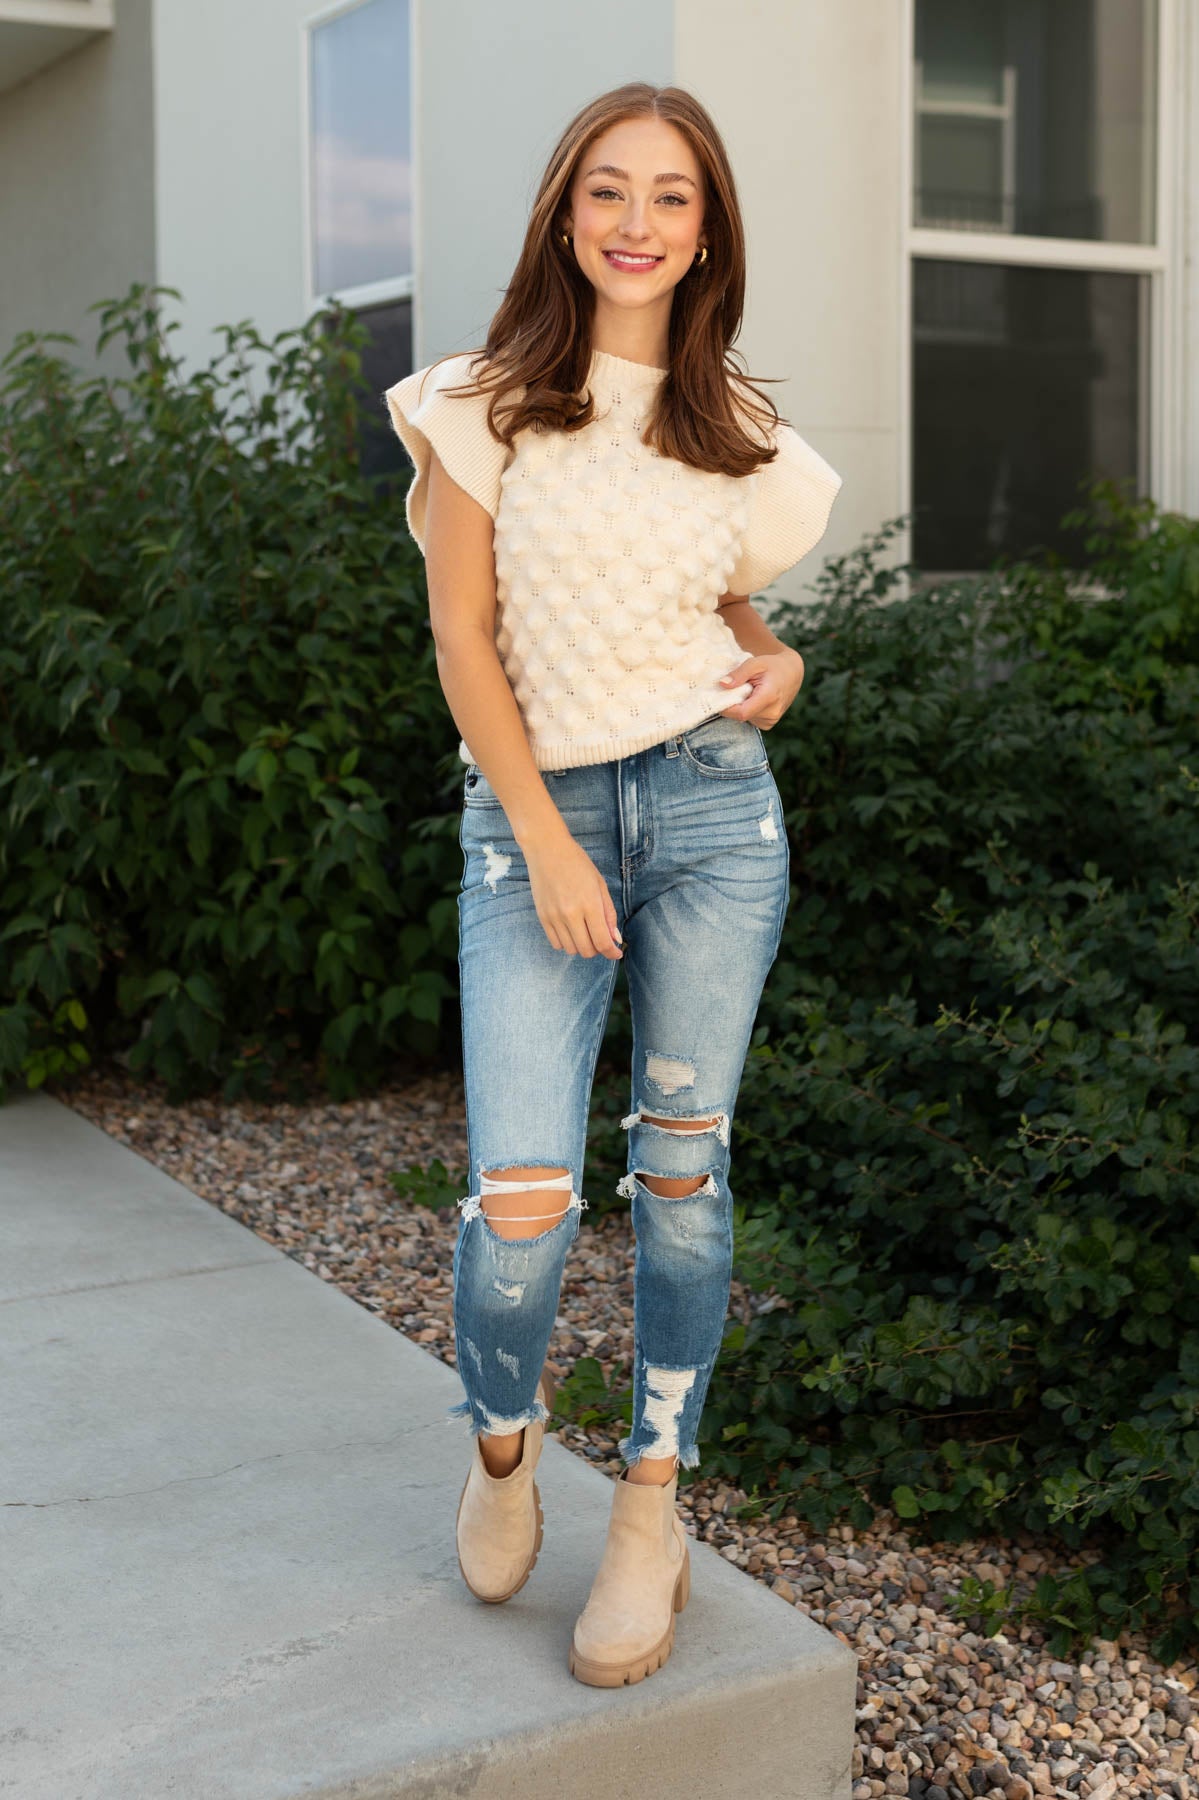 Cream top sweater with short cap sleeves